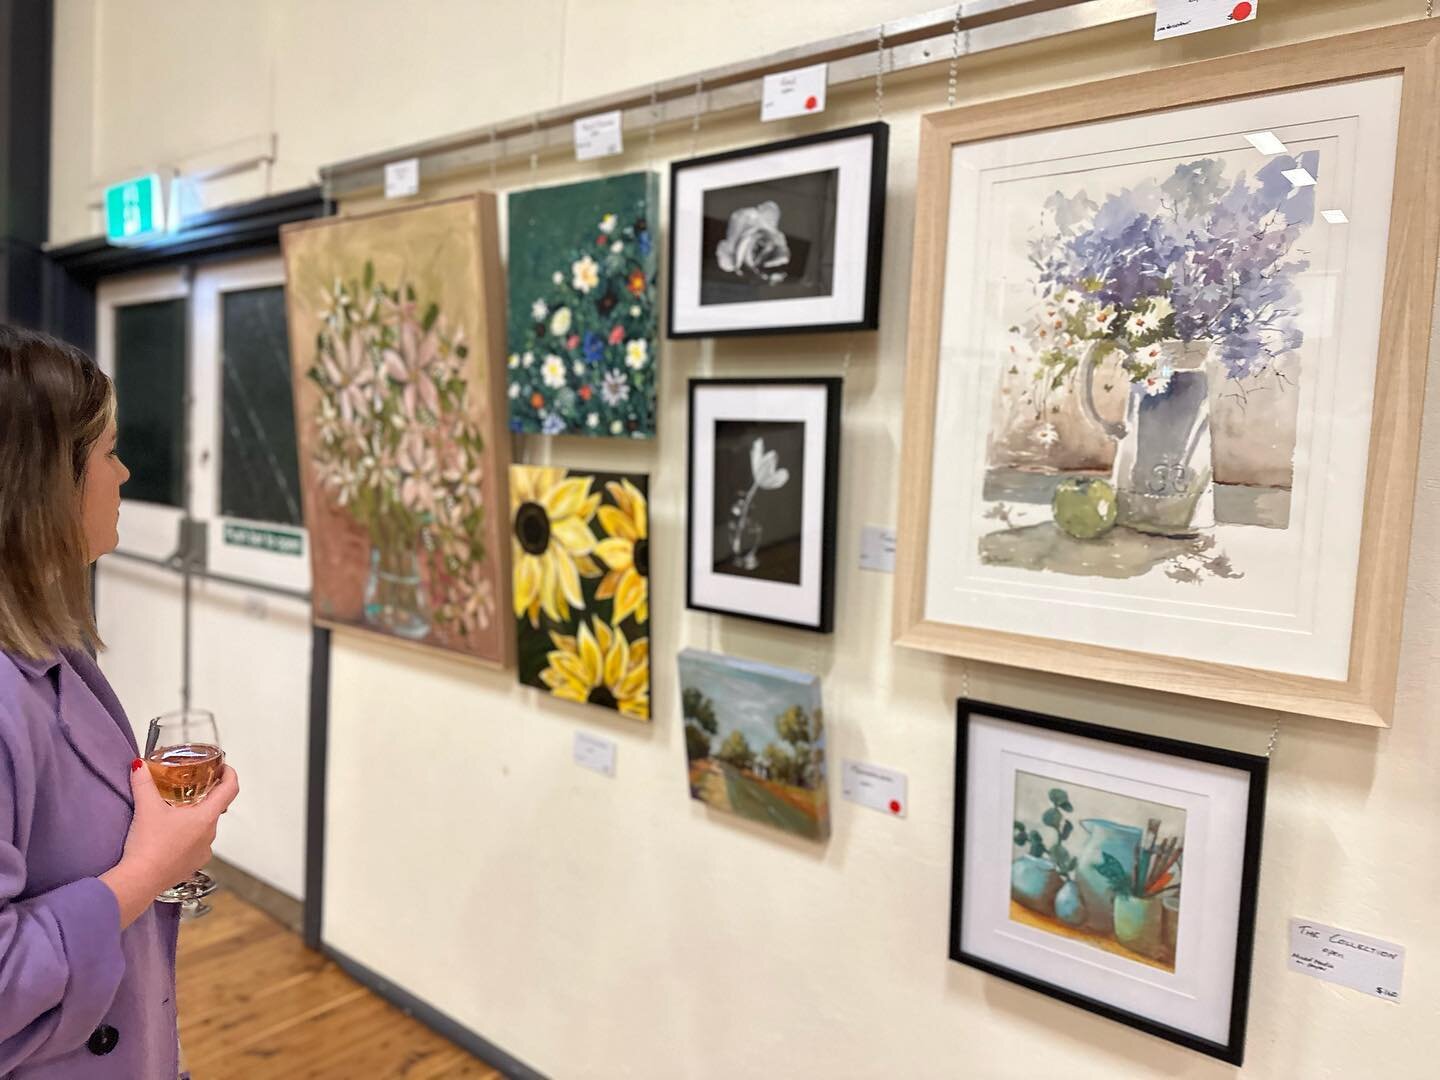 Gala night at the Ardlethan Art Prize. A collection of pieces on display in the Ardlethan Memorial Hall 🖼️🖌️

Exhibition open Saturday 13 + Sunday 14 May. 
.
#canolatrail #artexhibition #ardlethan #art #visitriverina #coolamonshire #visitcoolamonsh